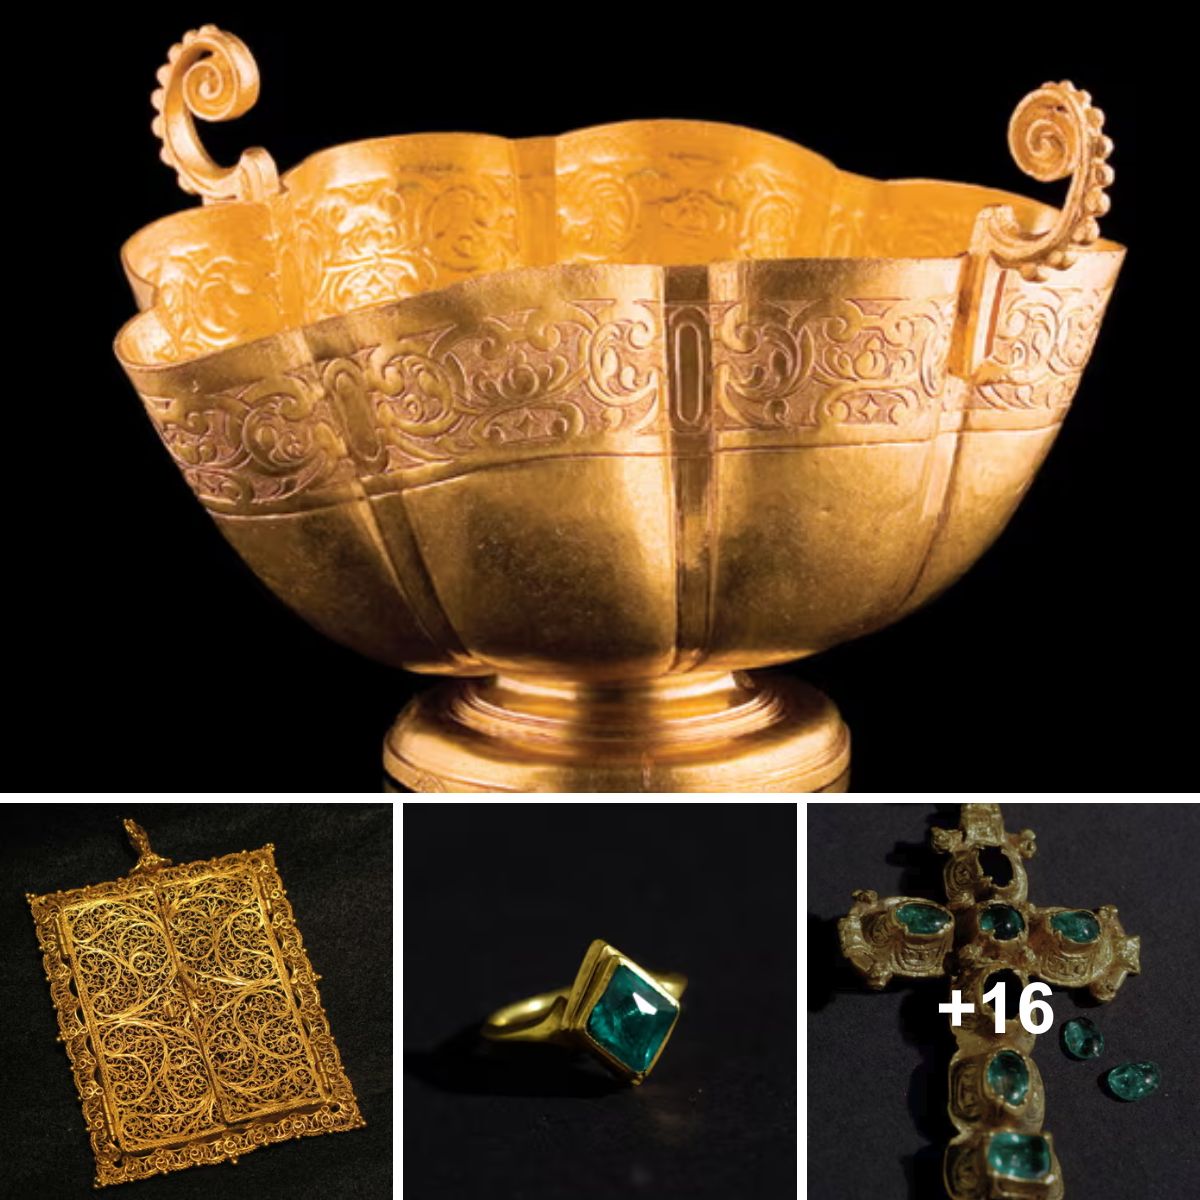 Spanish Shipwreck Treasure Fetches Staggering $2 Million in New York Auction